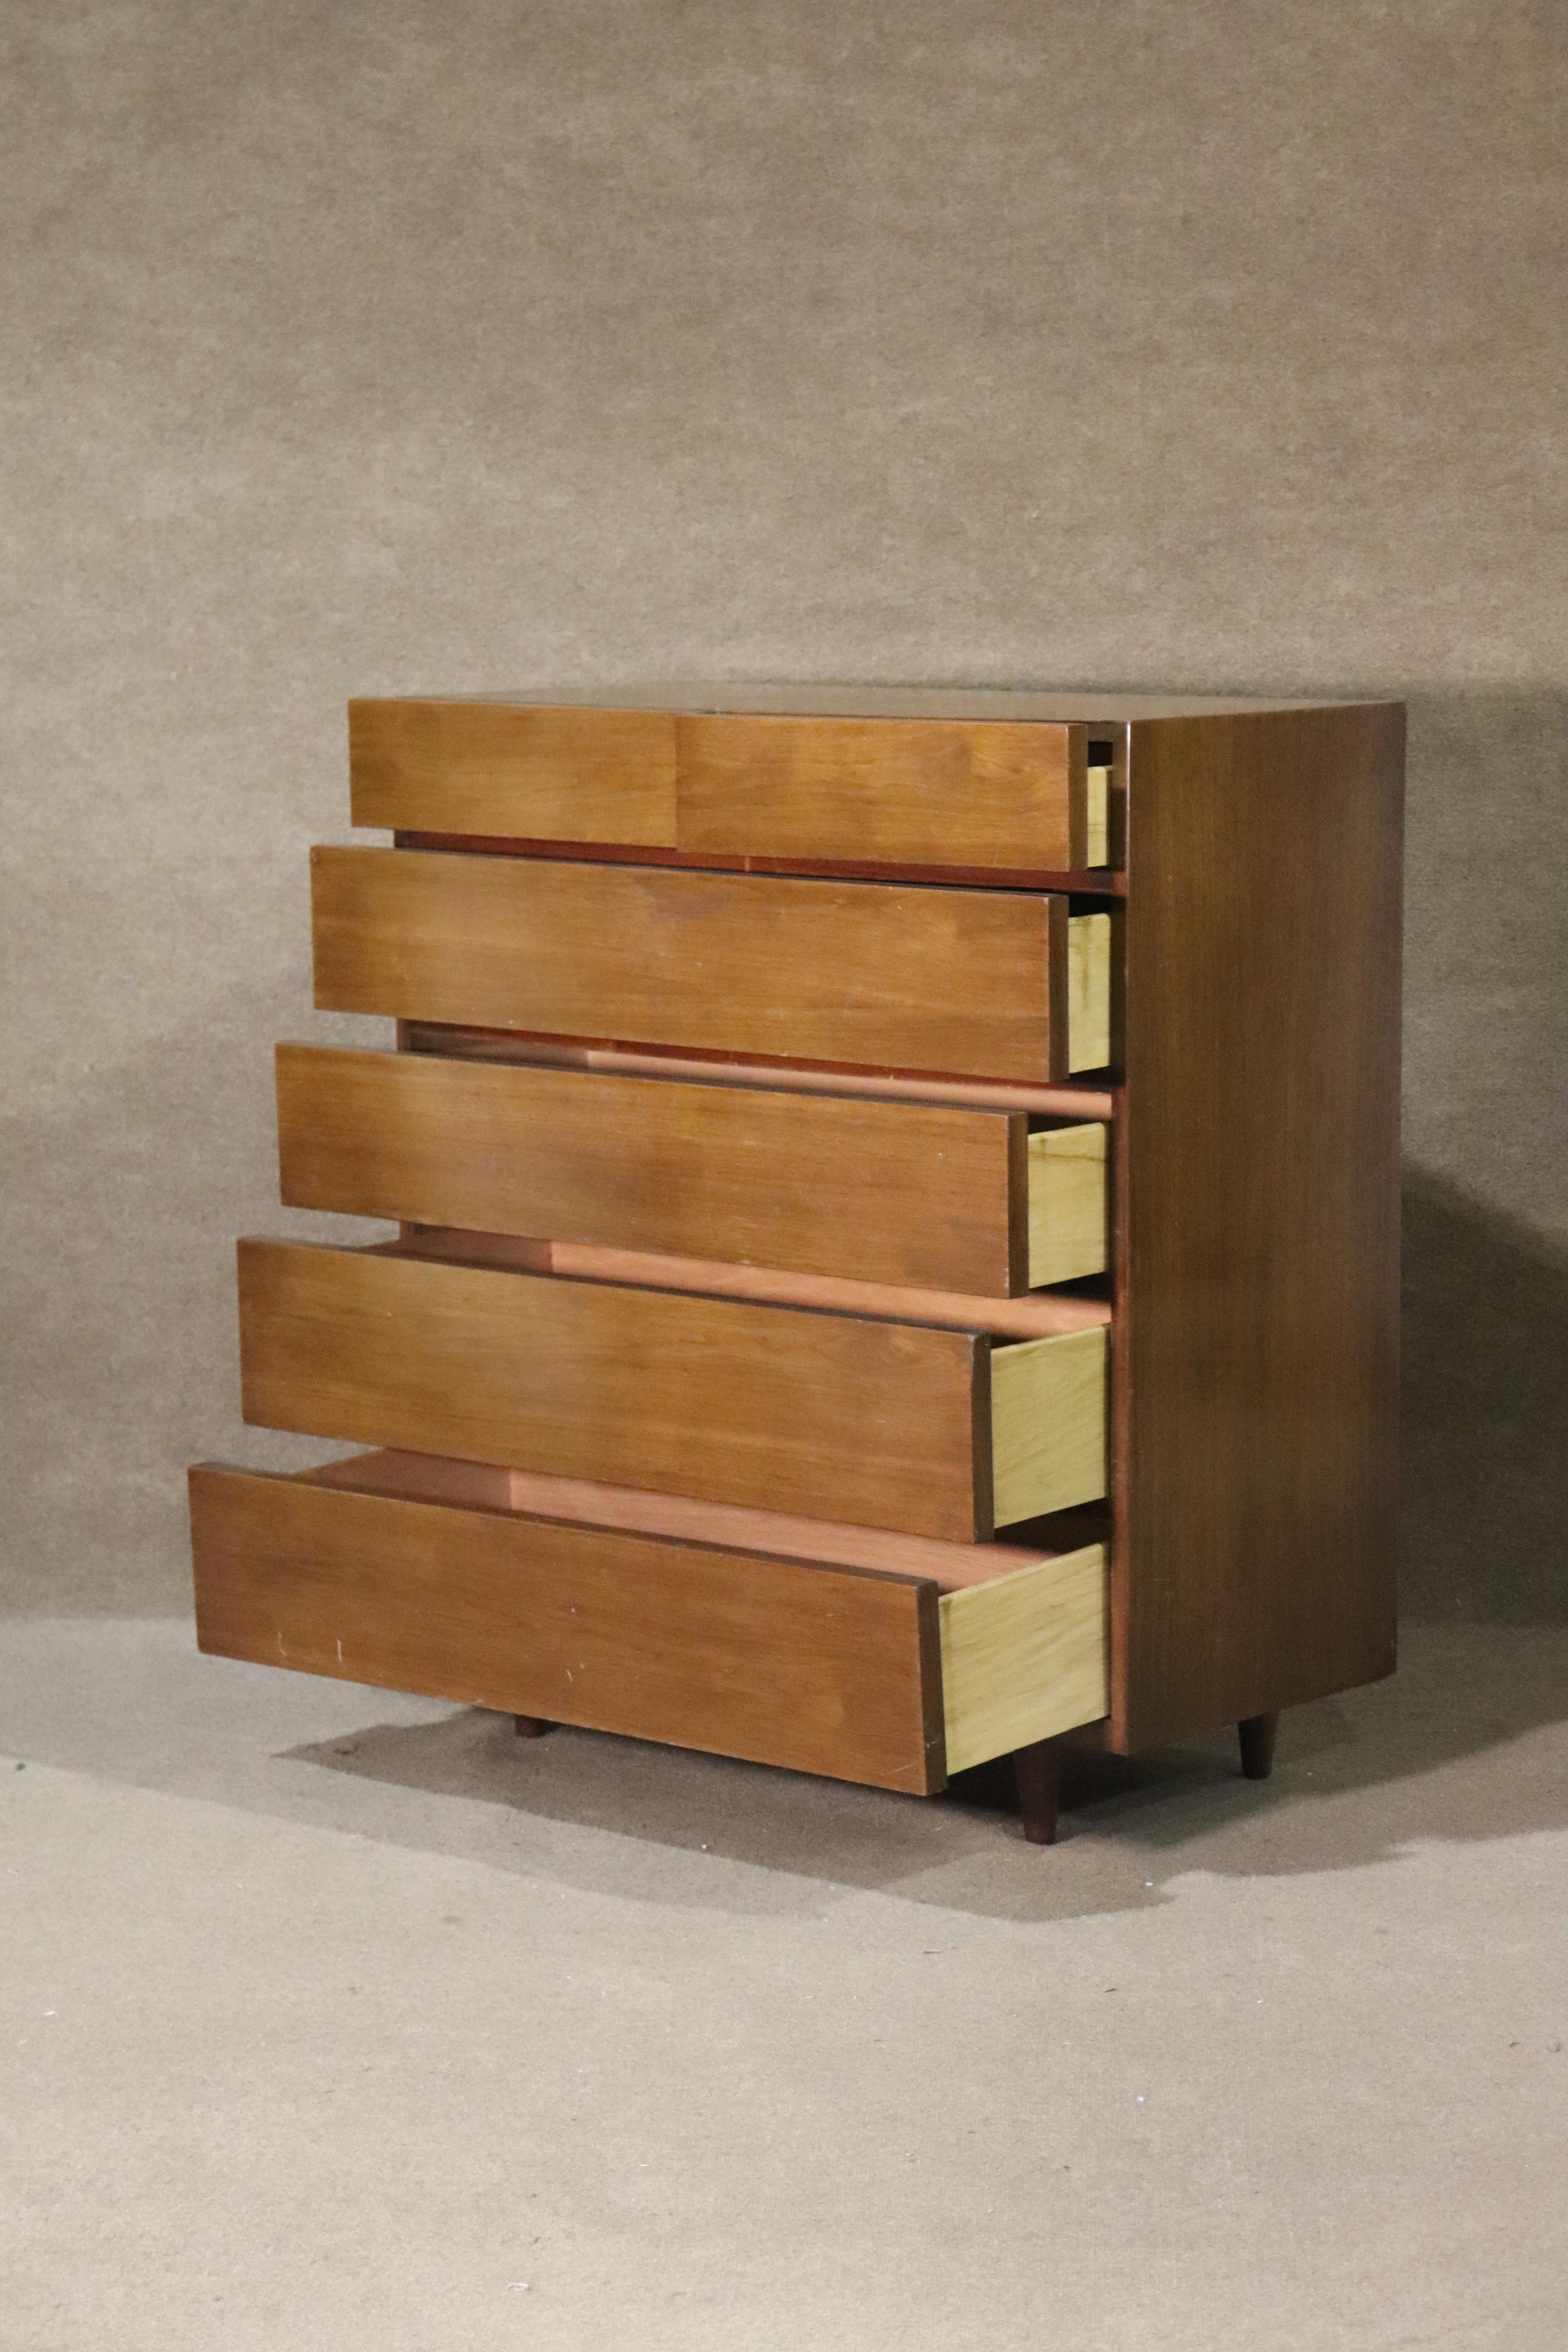 Tall chest of drawers made by American of Martinsville. Mid-century modern style with a simple squared esthetic in warm walnut grain.
Please confirm location NY or NJ